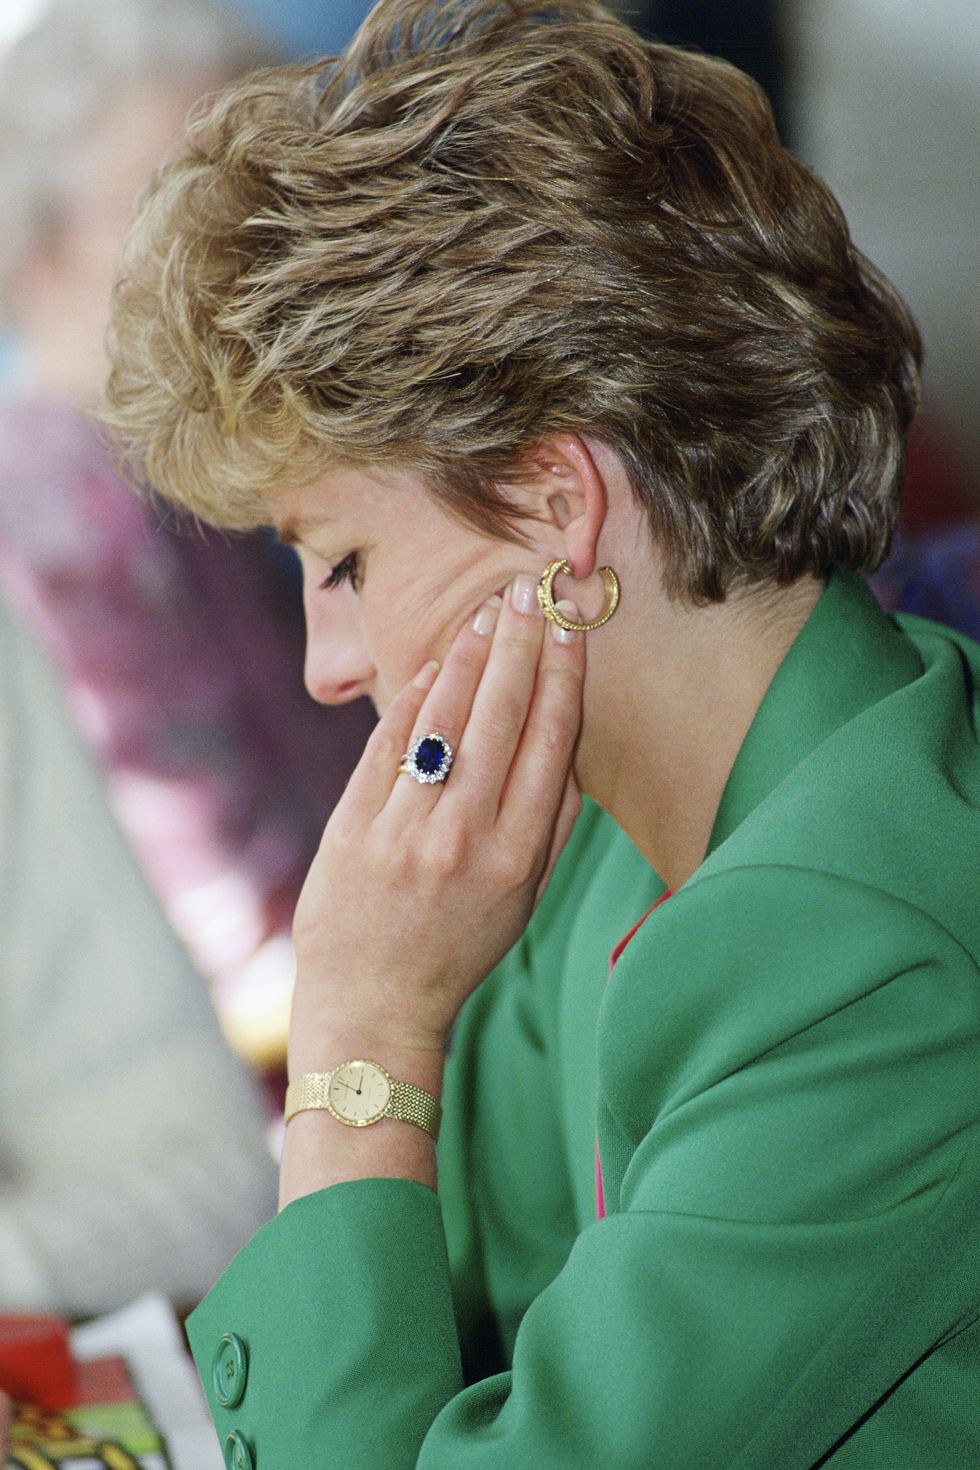 united kingdom   april 28  diana, princess of wales, wearing her diamond and sapphire engagement ring bought from garrards, the crown jewellers with a gold watch and gold earrings  photo by tim graham photo library via getty images